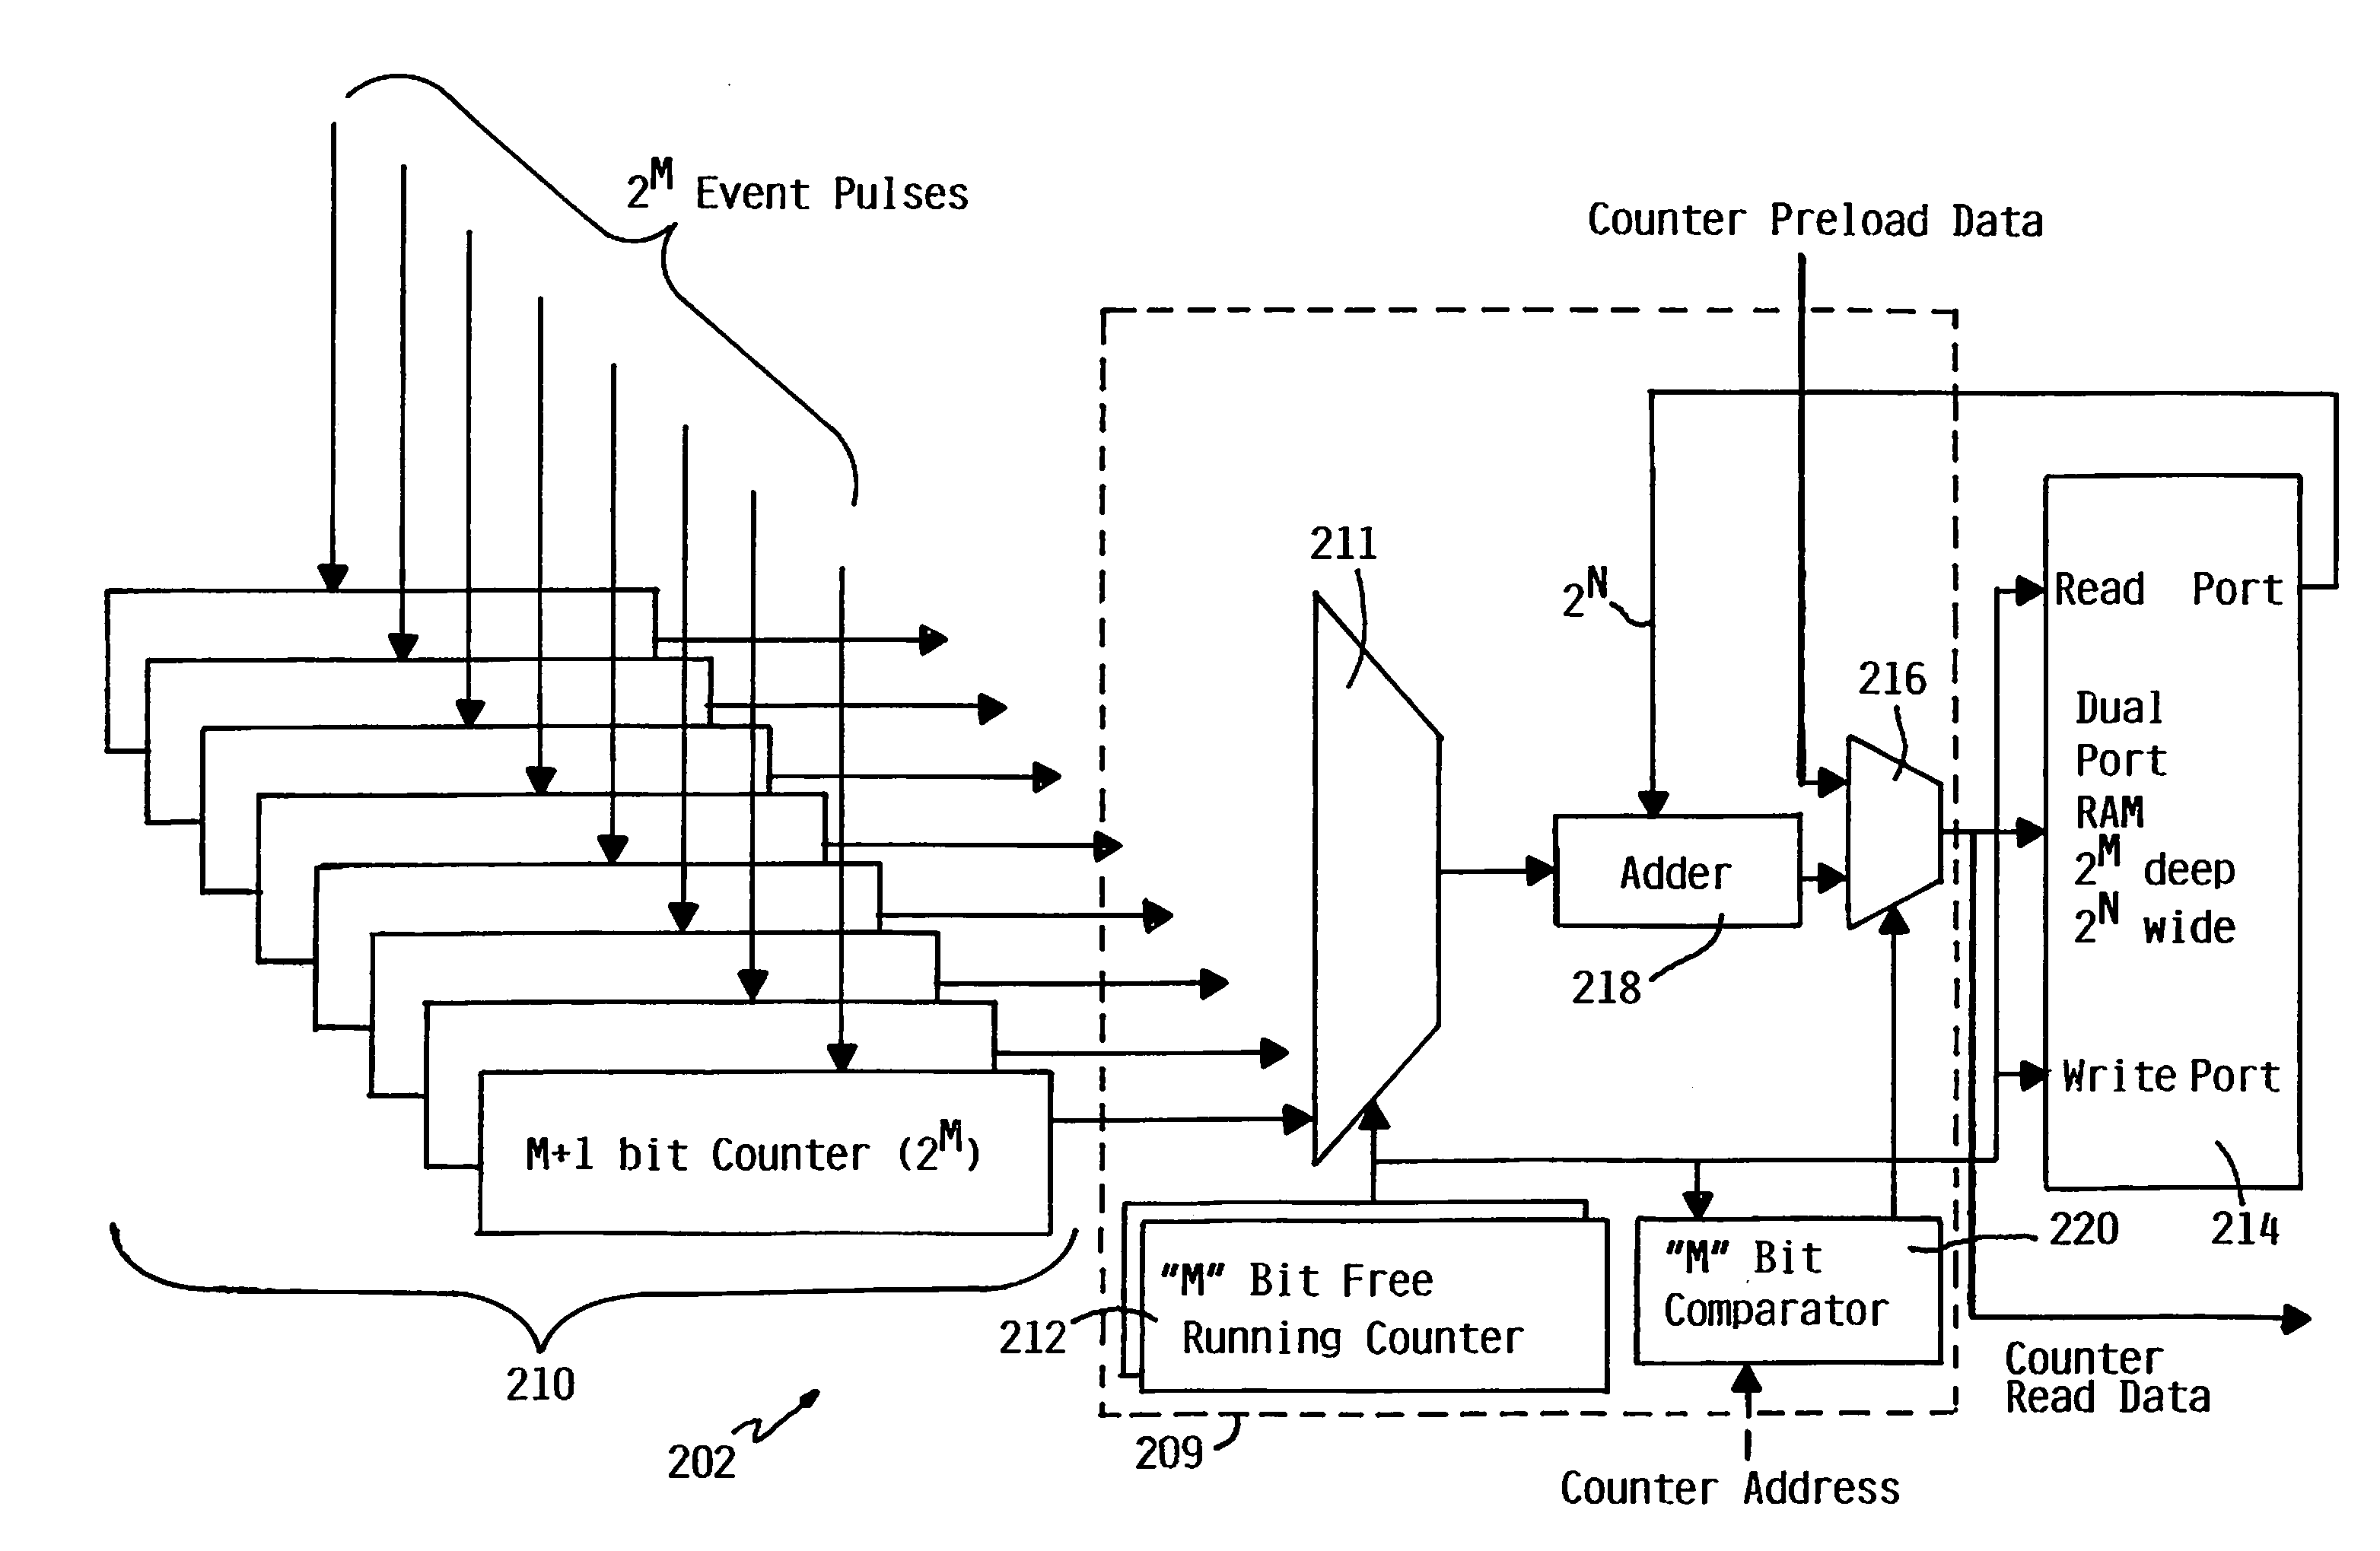 Ram based implementation for scalable, reliable high speed event counters